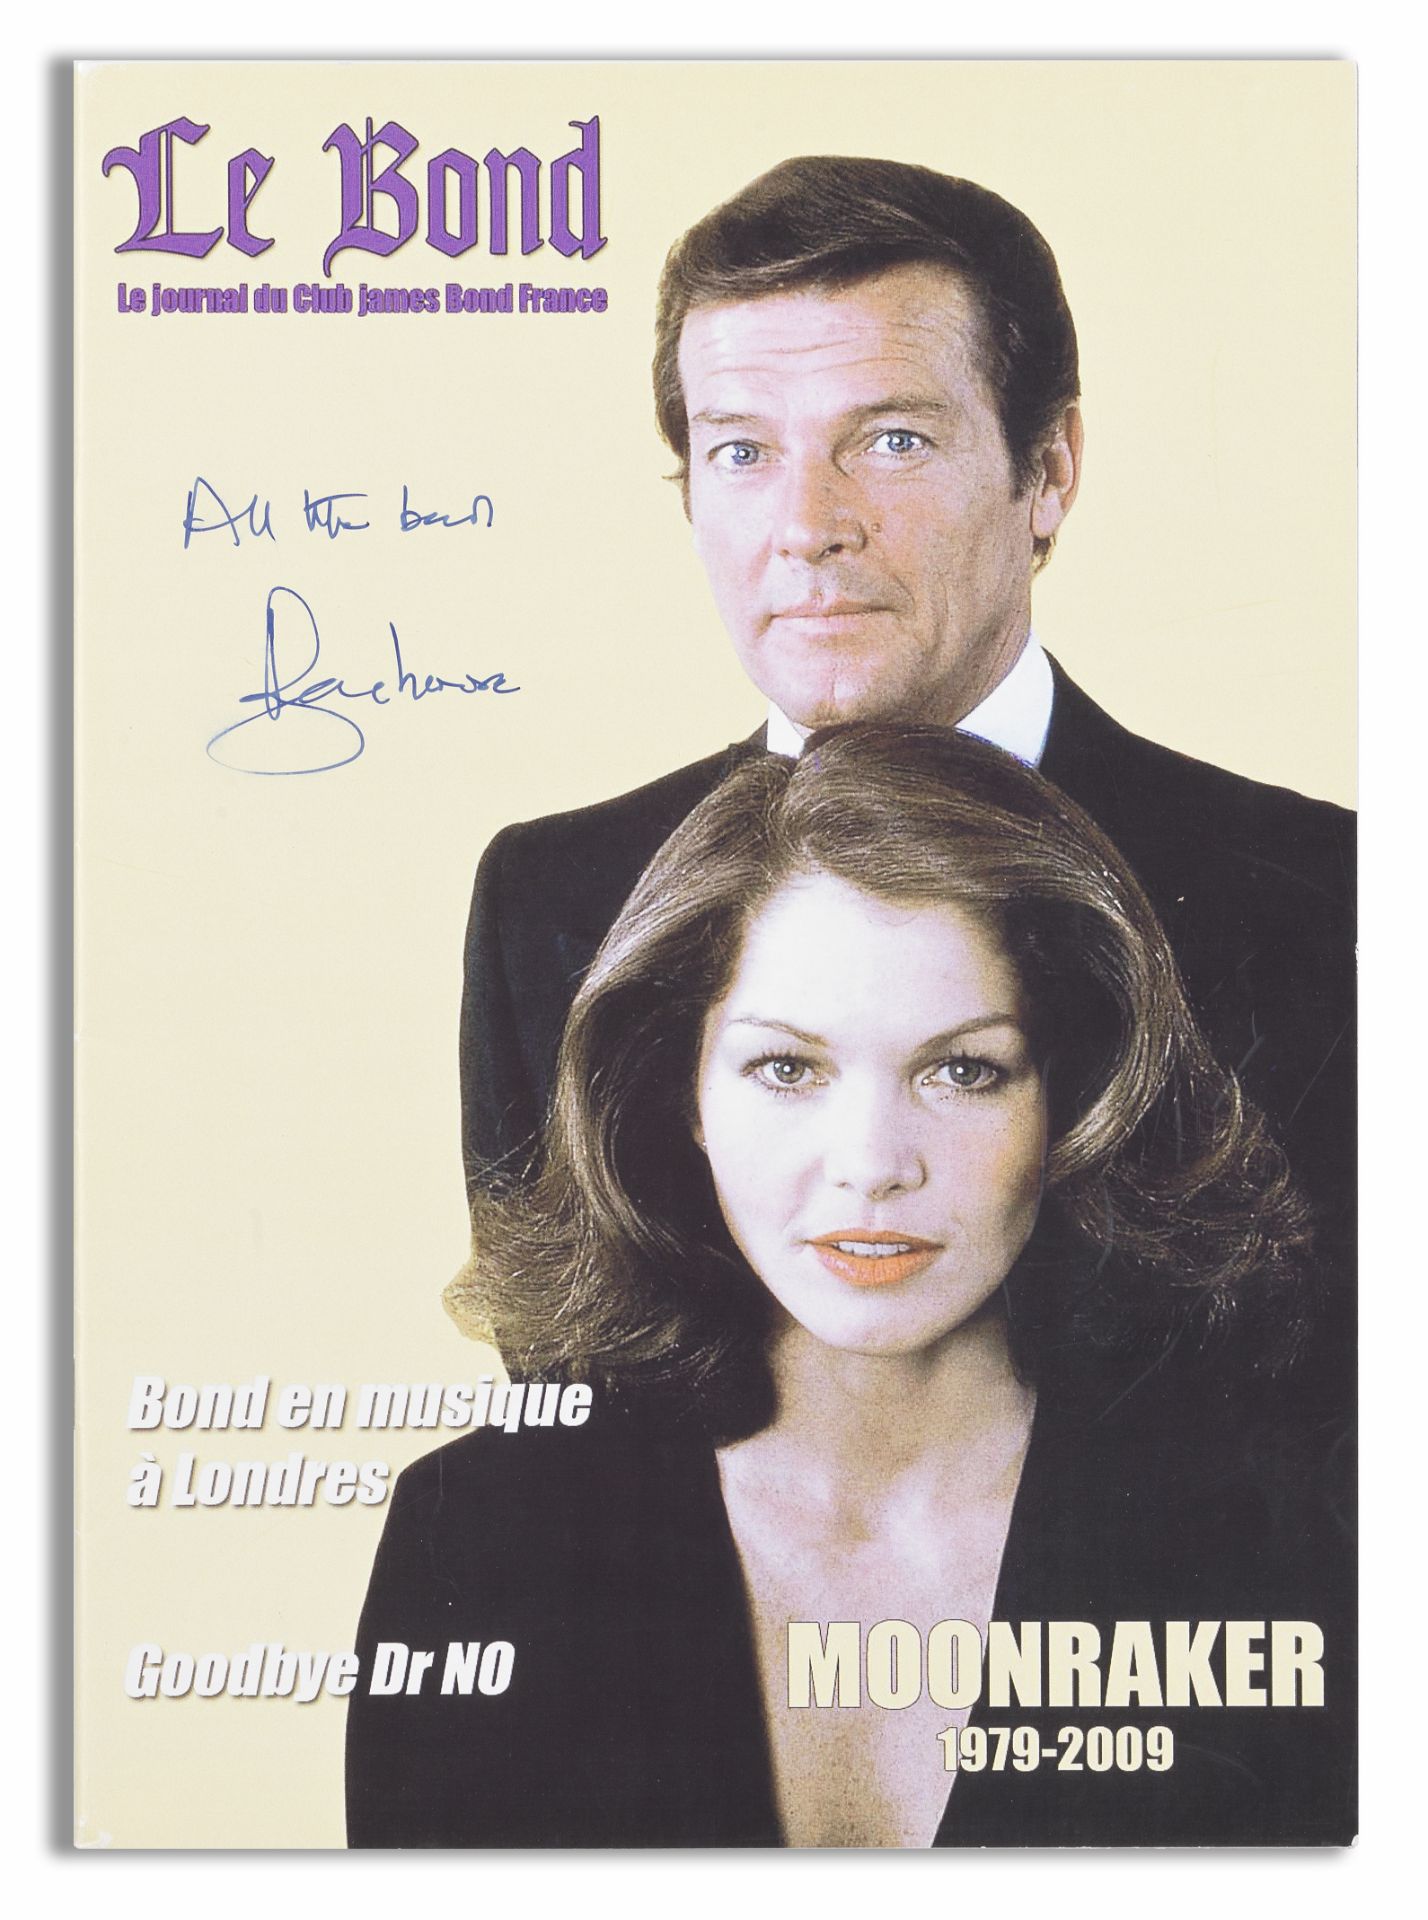 An issue of the magazine Le Bond signed by Sir Roger Moore 2009